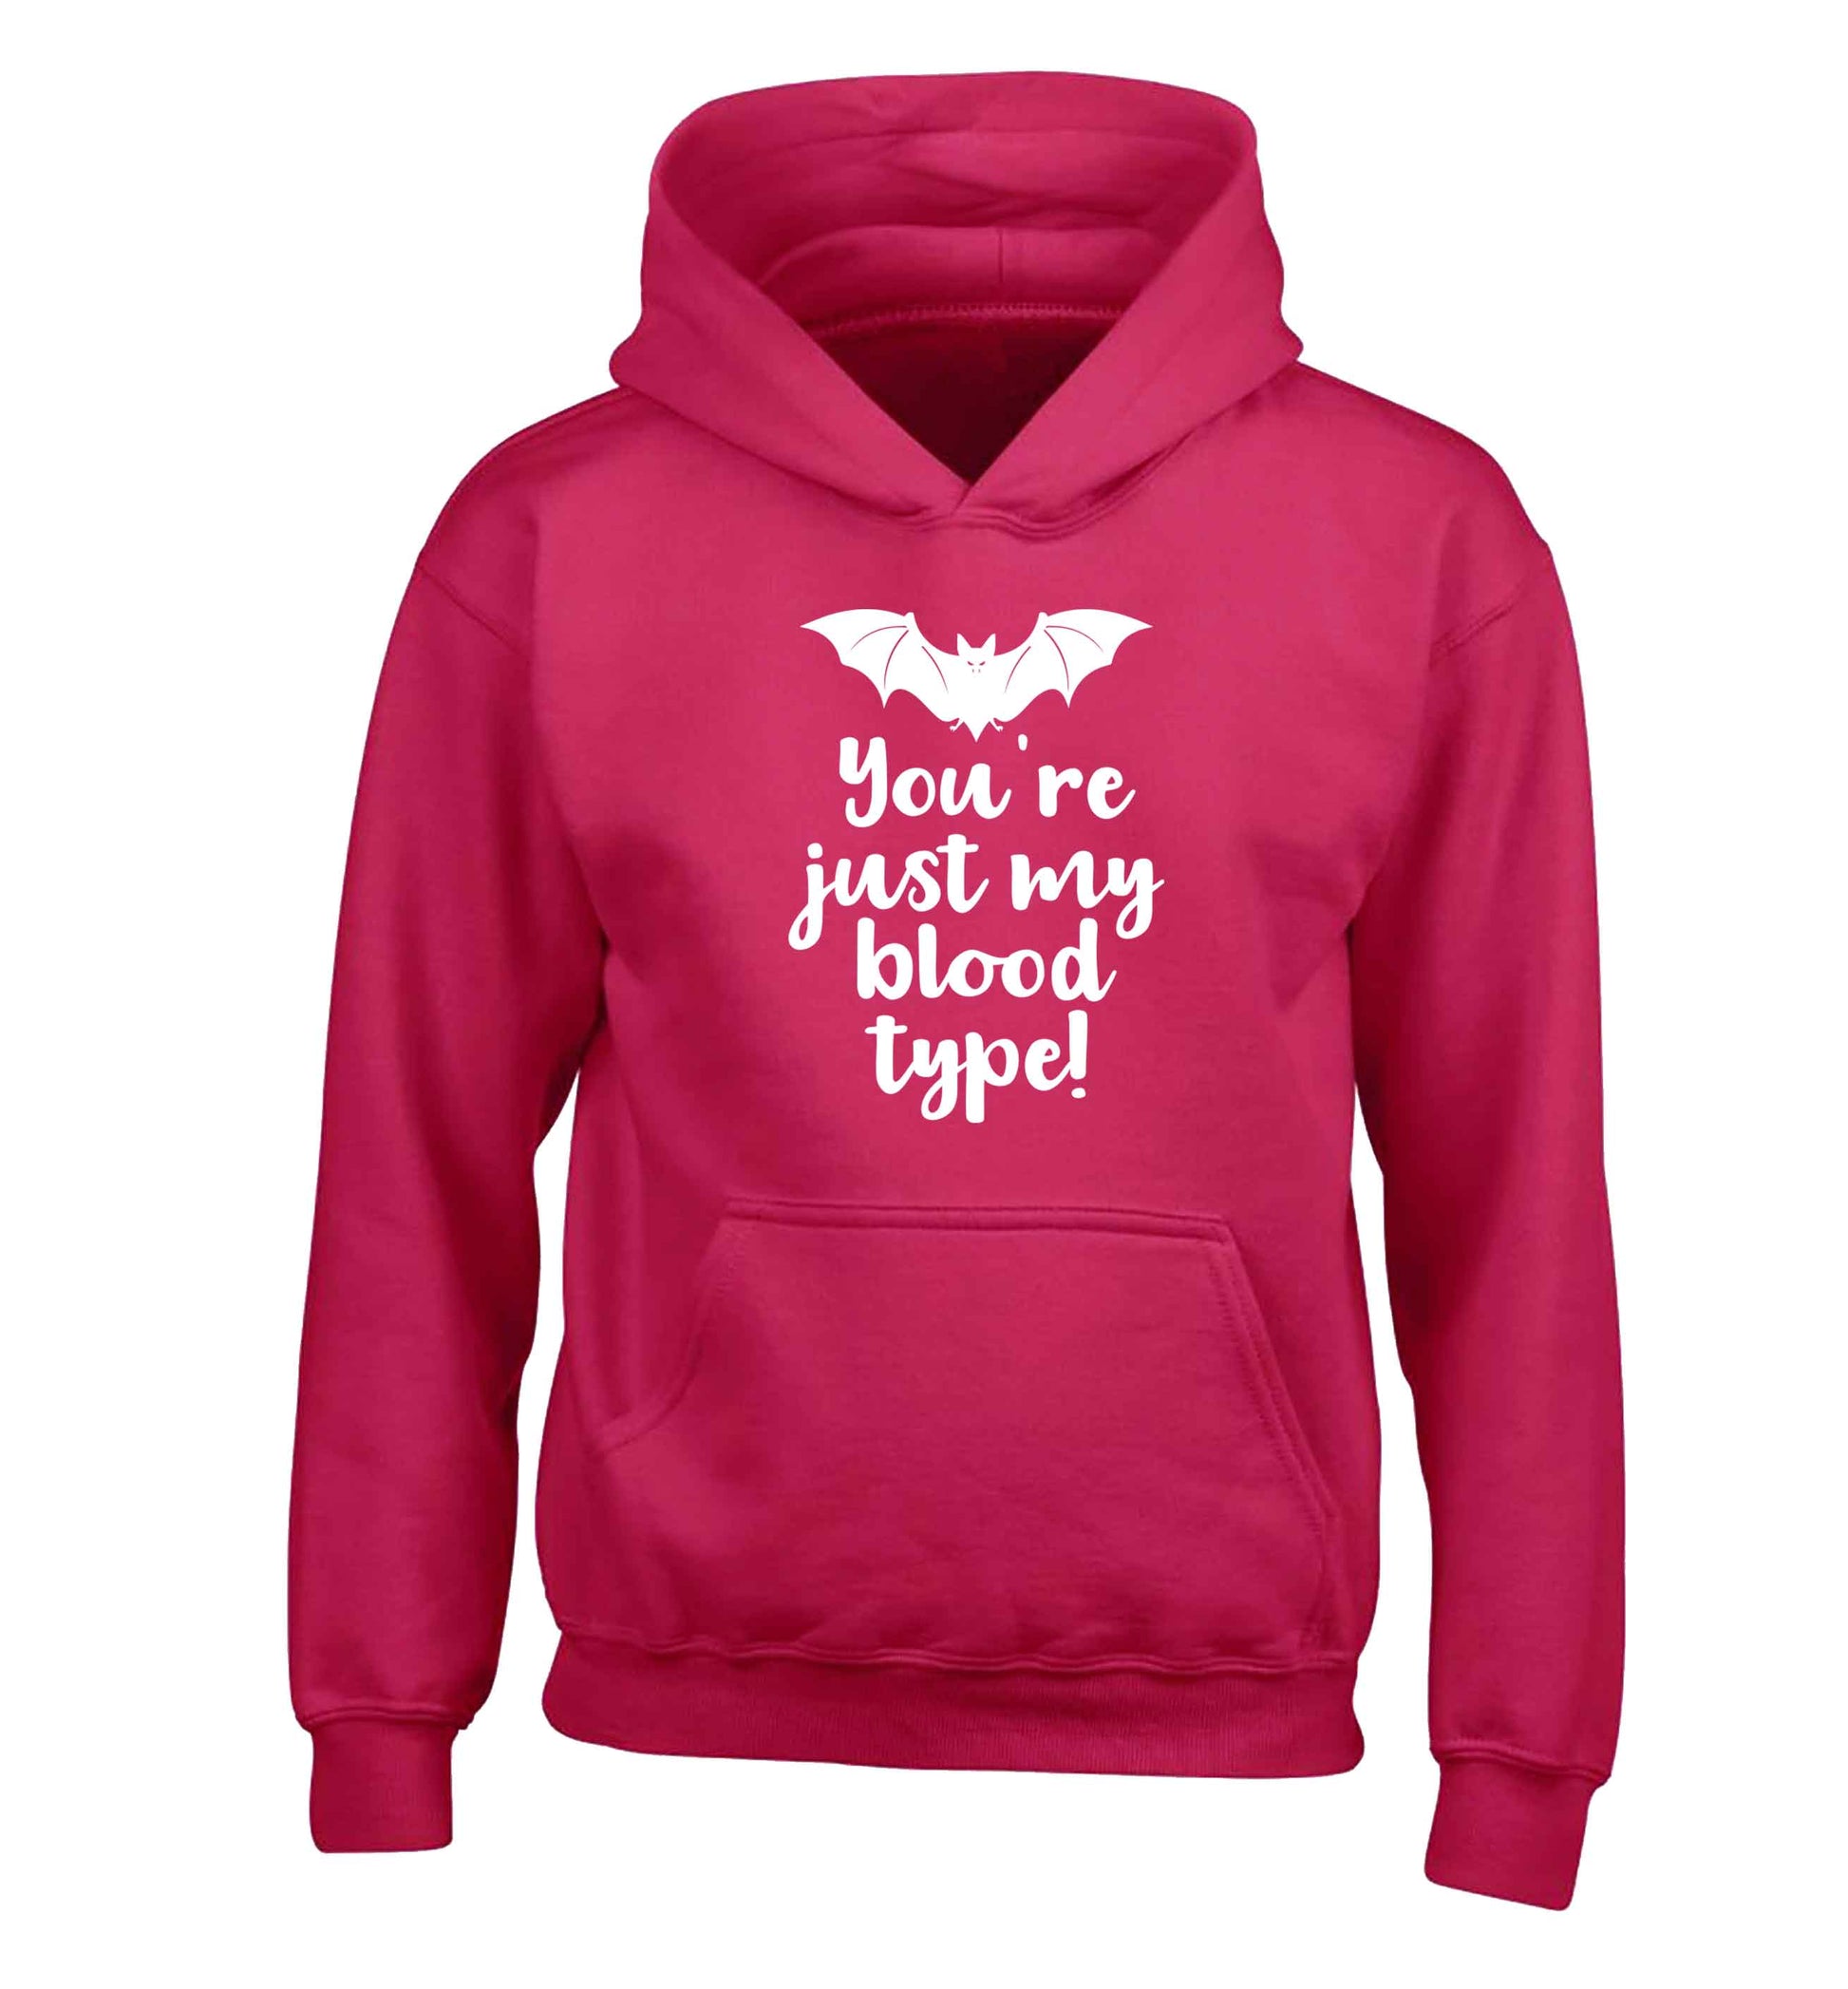 You're just my blood type children's pink hoodie 12-13 Years